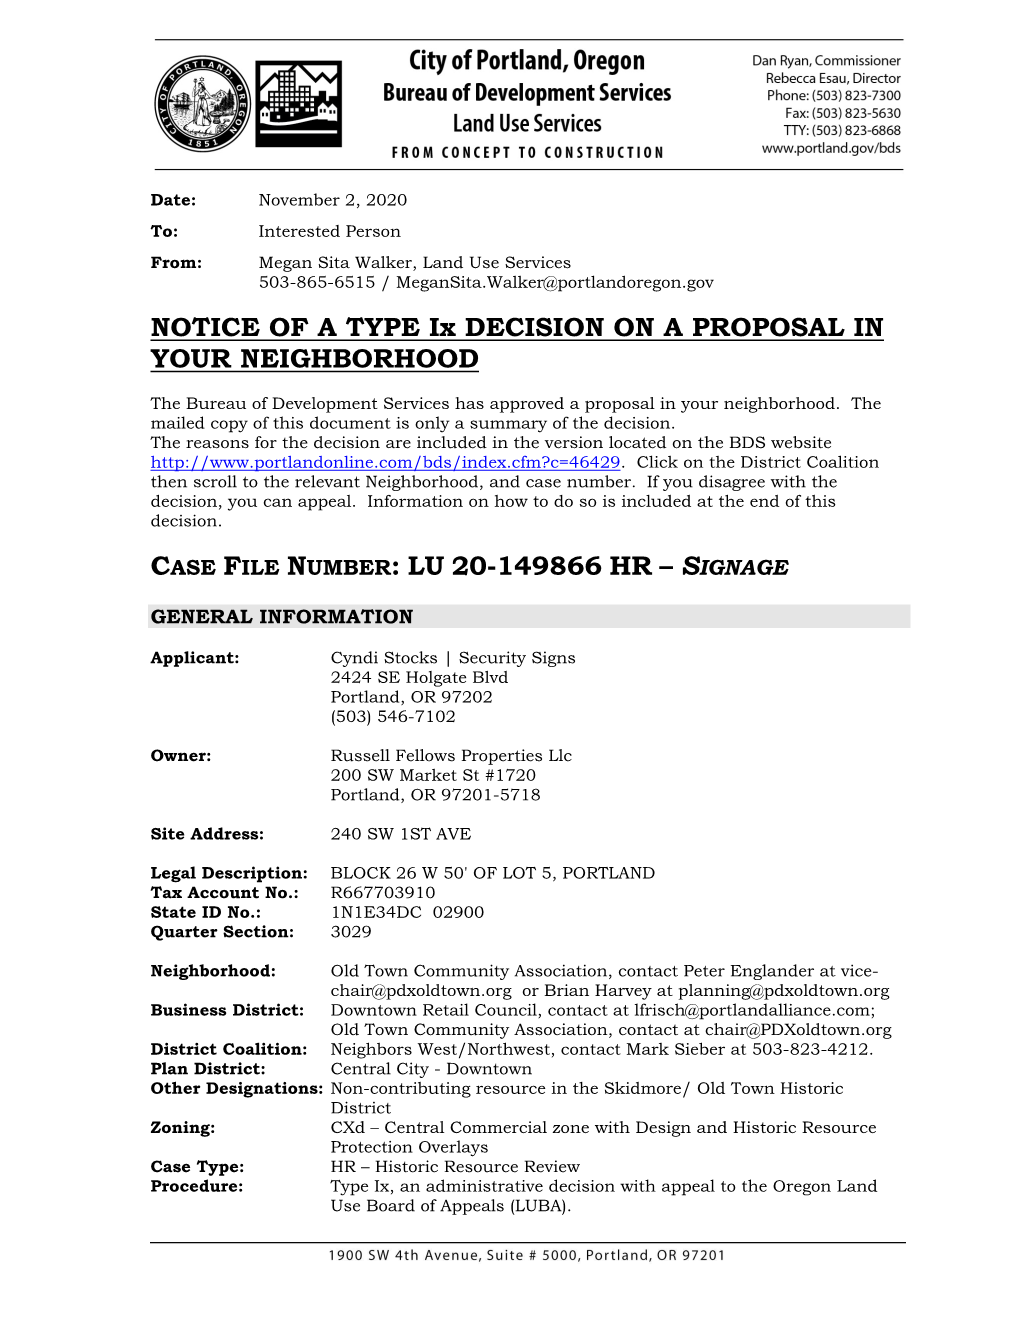 Historic Resource Review Procedure: Type Ix, an Administrative Decision with Appeal to the Oregon Land Use Board of Appeals (LUBA)